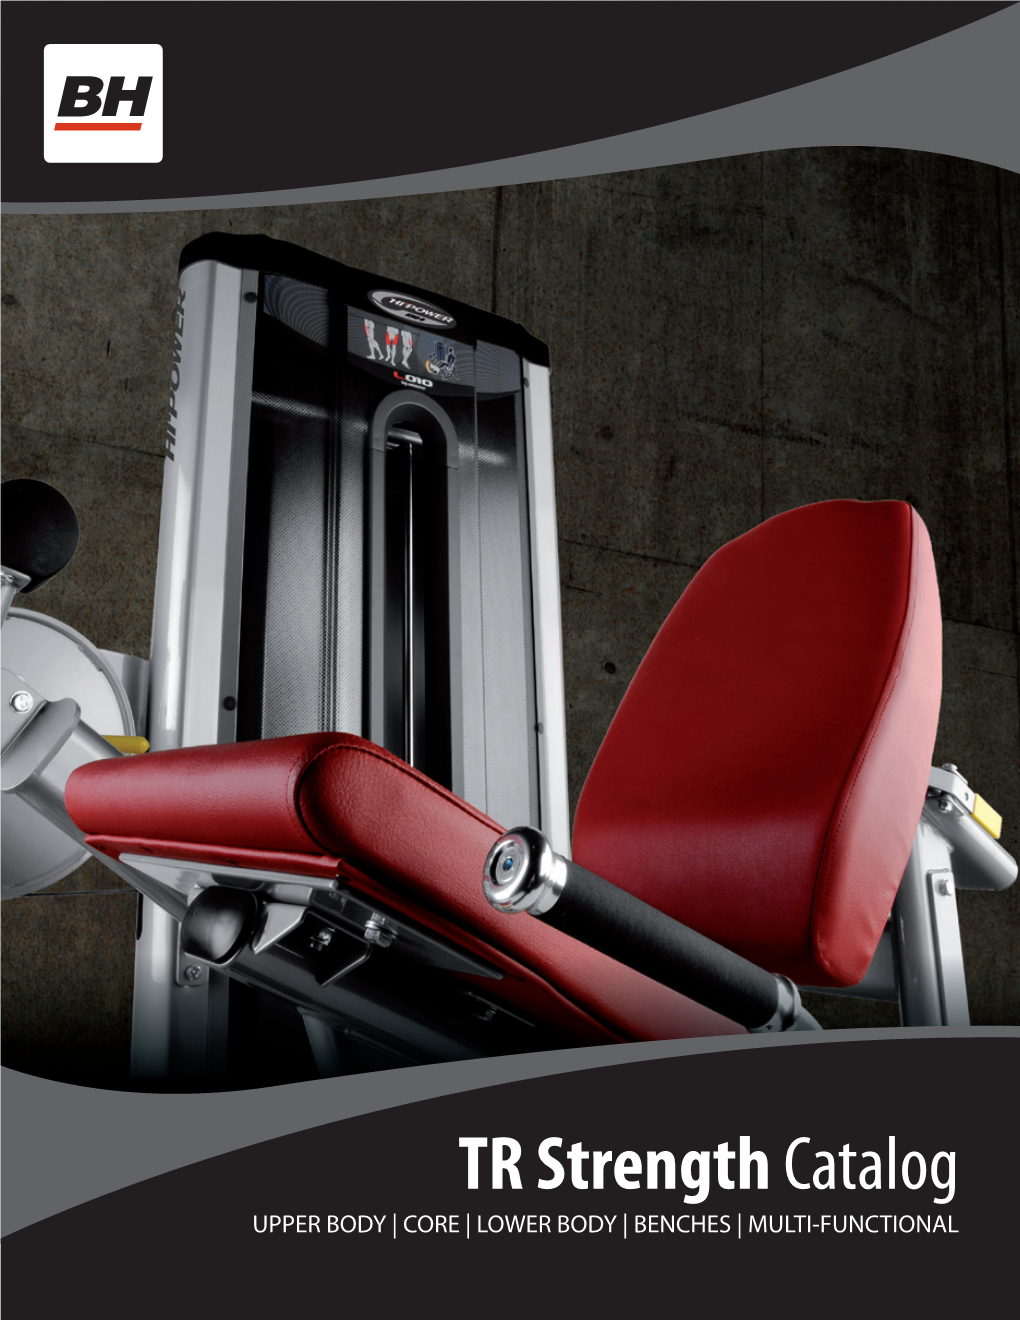 TR Strength Catalog UPPER BODY | CORE | LOWER BODY | BENCHES | MULTI-FUNCTIONAL the Art of Biomechanics BH Has Been Building Strength Equipment for Over 25 Years